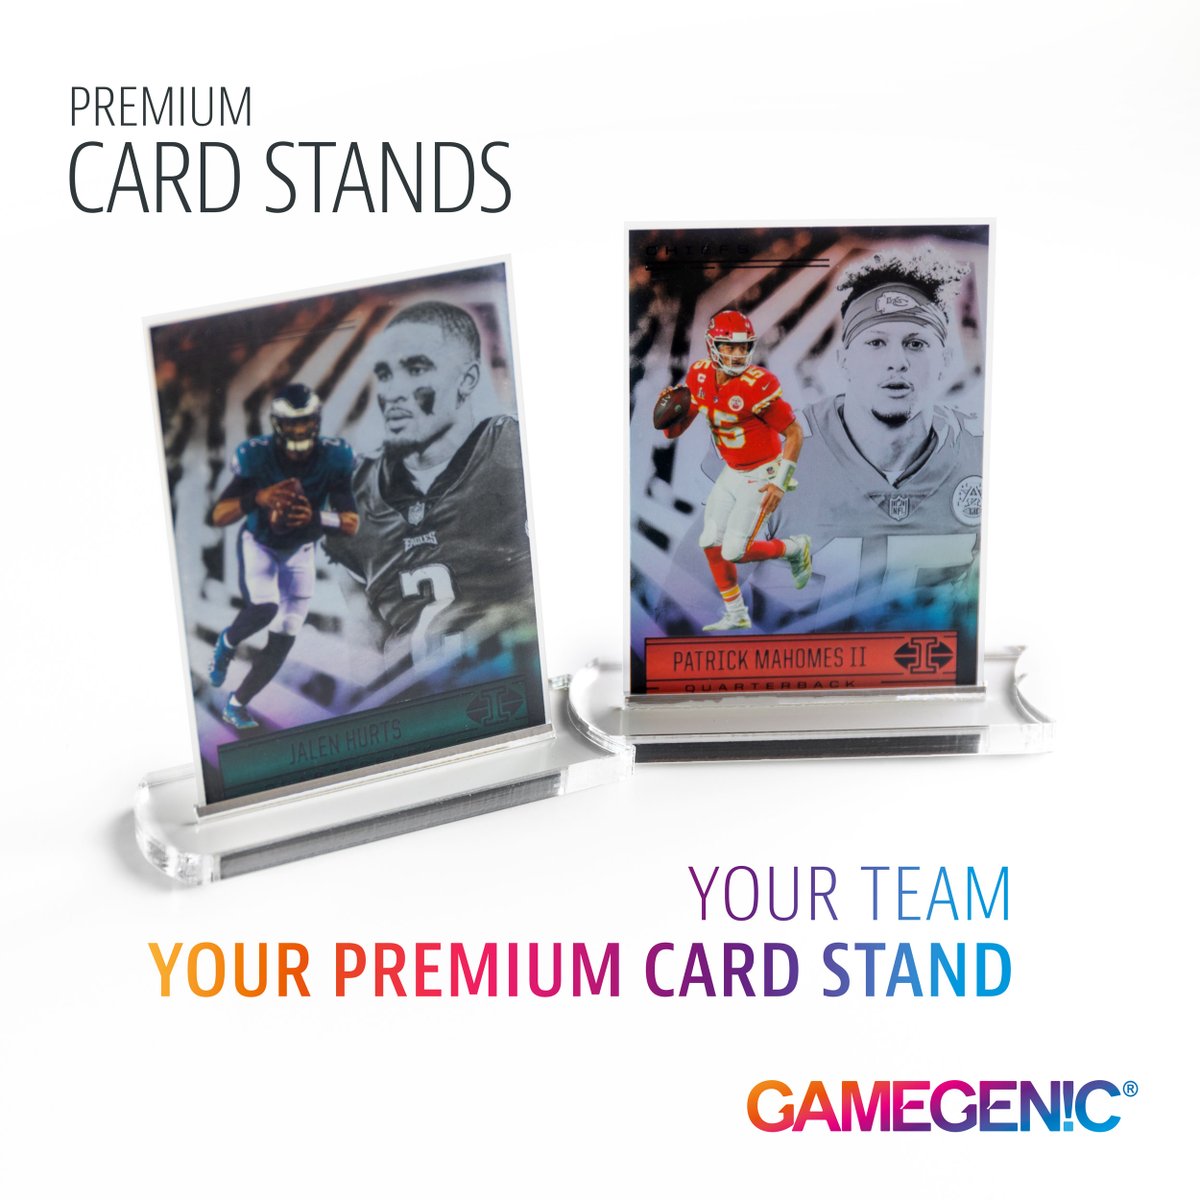 LET THE BIG GAME BEGIN! 🏈🤩

We are looking forward to an exciting final!

Present your favorite and most valuable sports cards with style in our PREMIUM CARD STANDS!

Who do you think will win today? Let us know! 👇

#gamegenic #cardstands #sleeves #superbowl #SuperBowlLVII